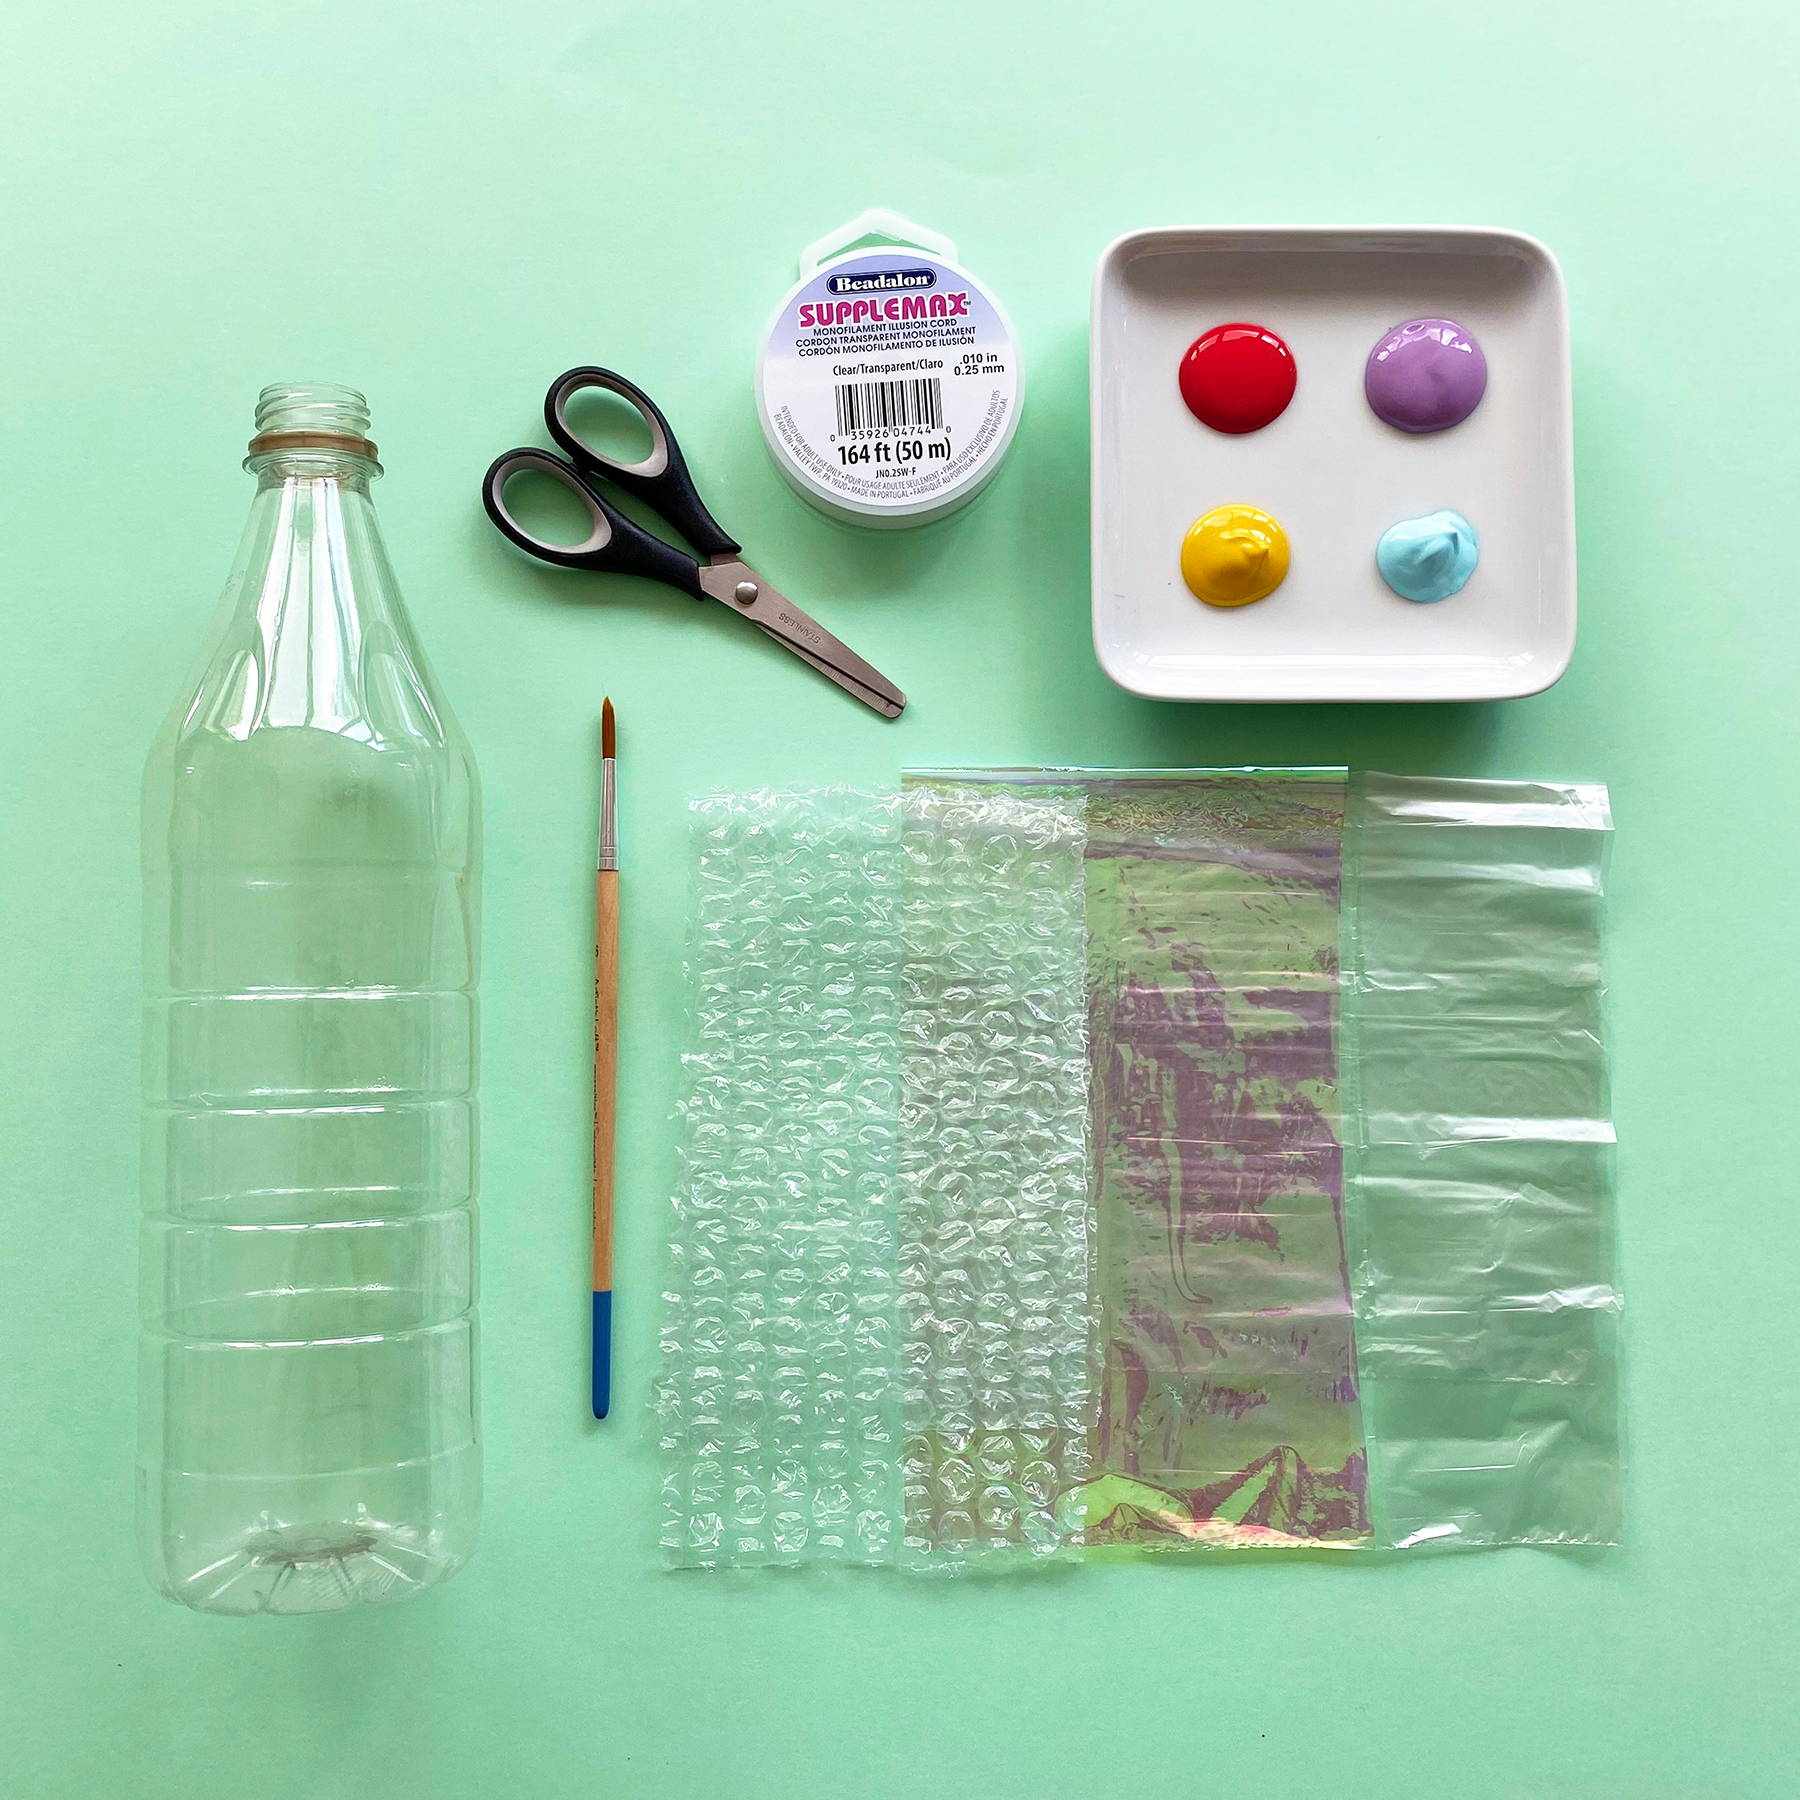 A photo of all the things you will need to make a recycled bottle jellyfish including, a plastic bottle, small paintbrush, scissors, clear string, paints, cellophane and bubblewrap